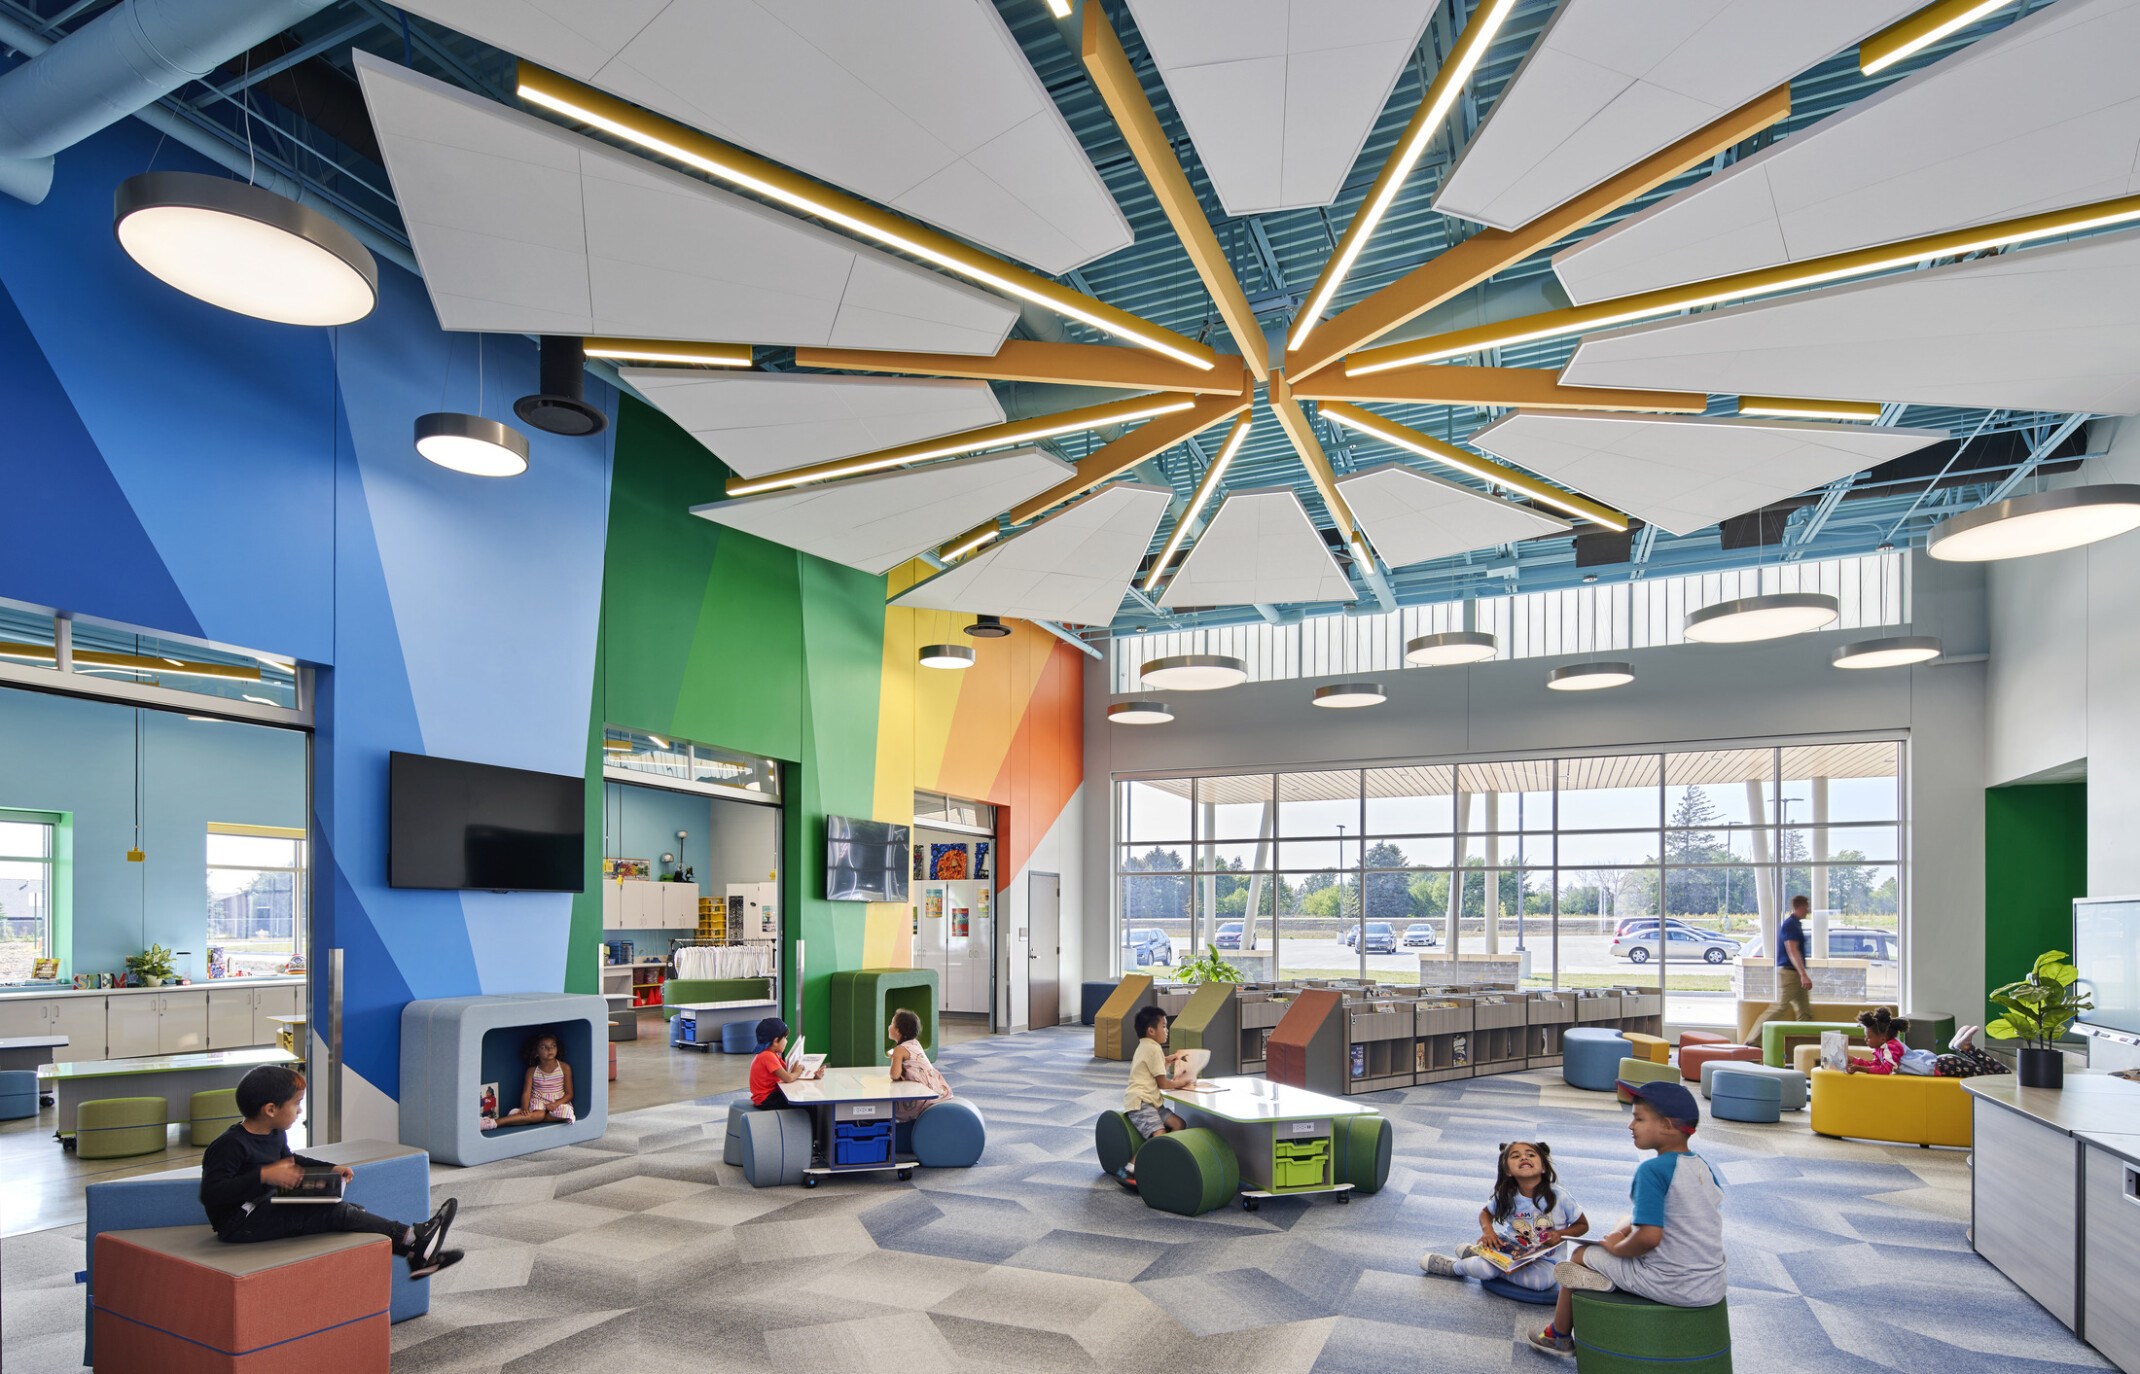 Classroom interior mixed-purpose room with vaulted ceilings, colorful beams, brightly colored walls, natural daylight, children seated in modern ergonomic chairs